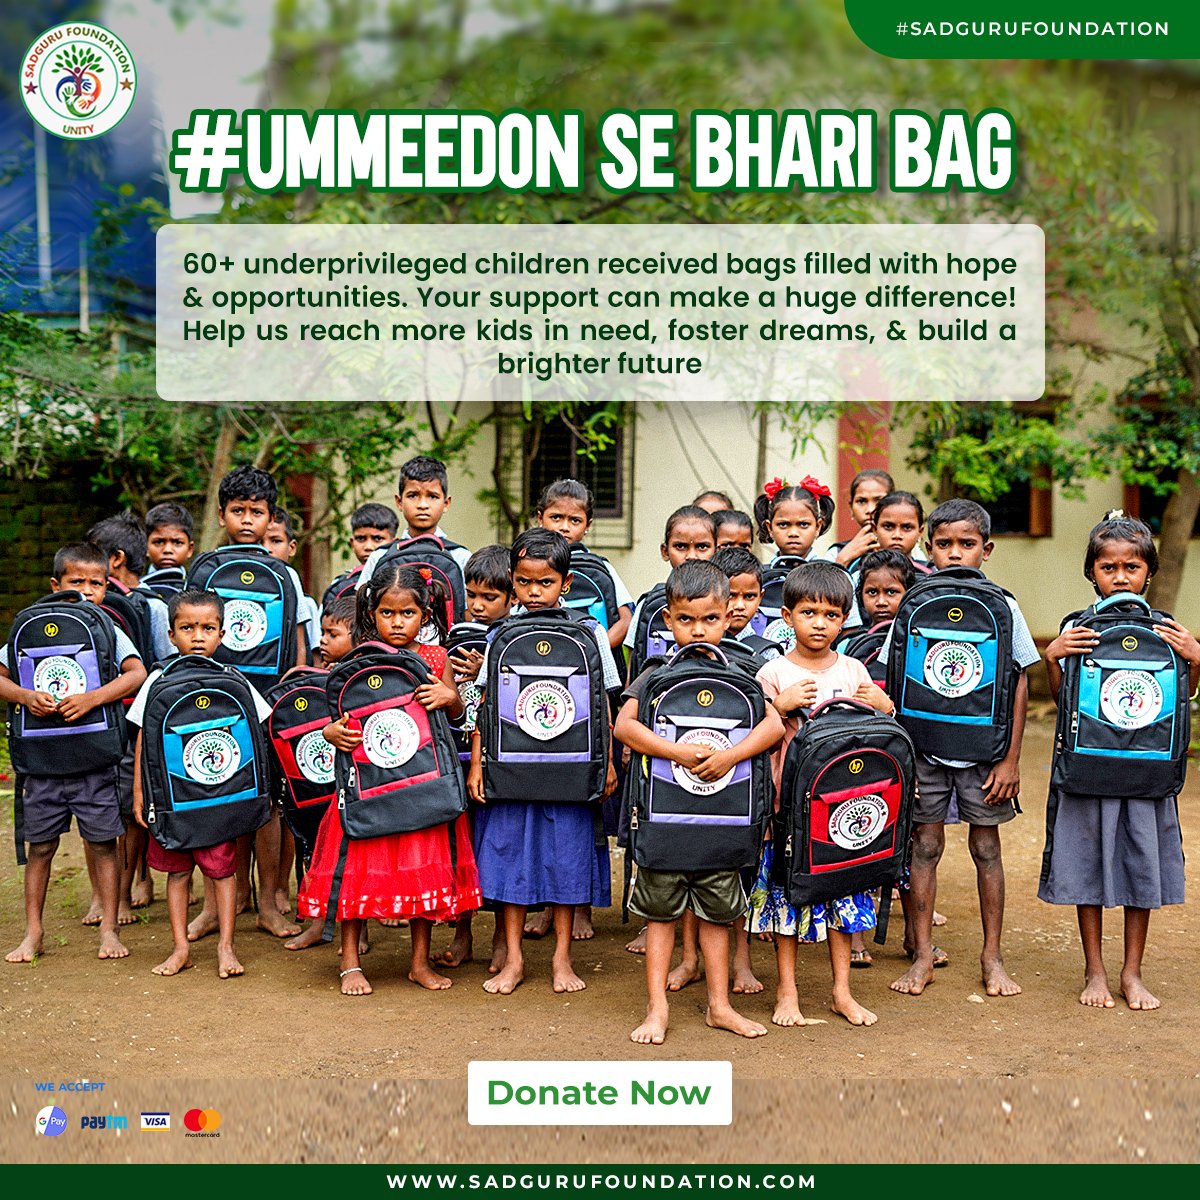 The #Umeed they need from you to foster their dreams. Donate to help our cause.
.
.
#educateandempower #futureofindia #giveback #helpingothers #feedthehungry #changelives #helpneeded #impactinglives #donate #sadgurufoundationunity #educateachild #donateclothes #donateforacause